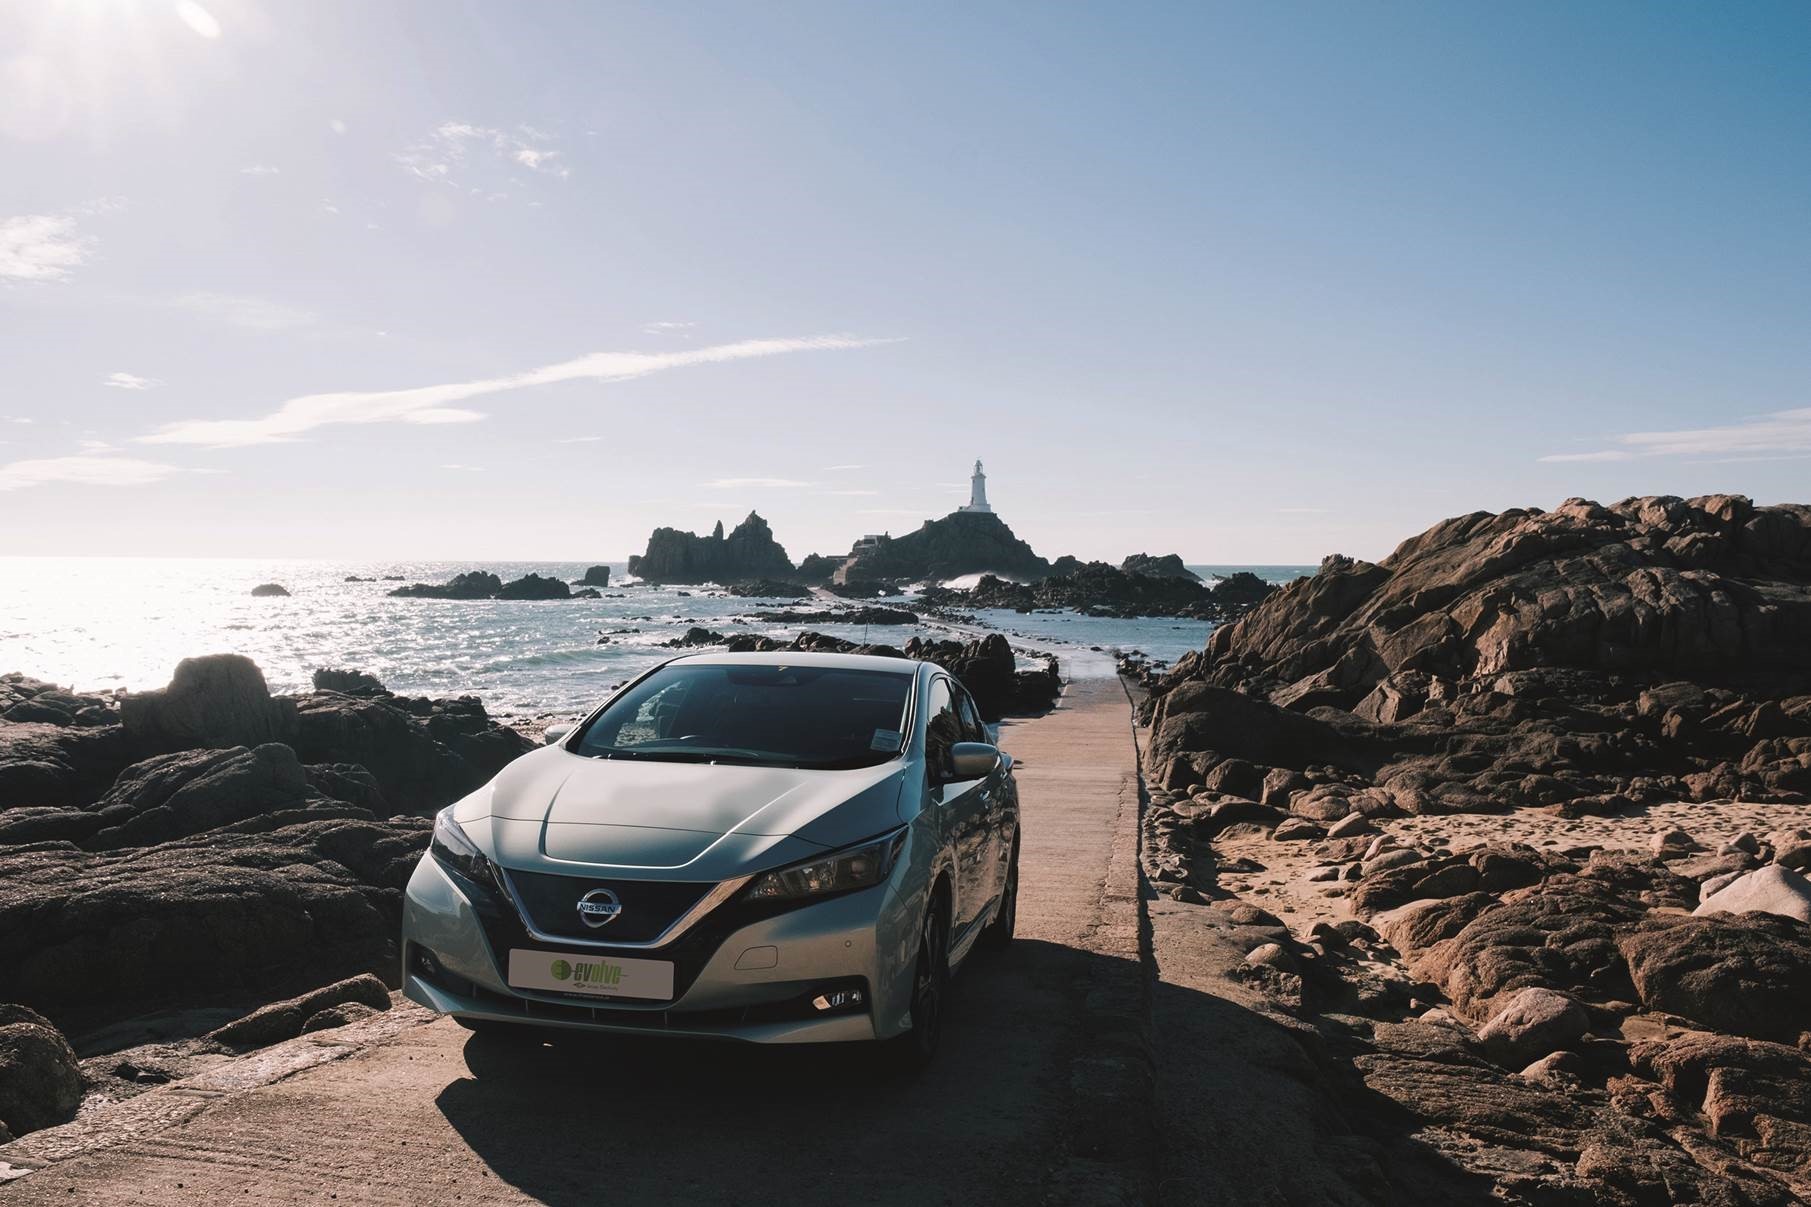 Nissan Leaf drives across causeway at Corbiere in Jersey